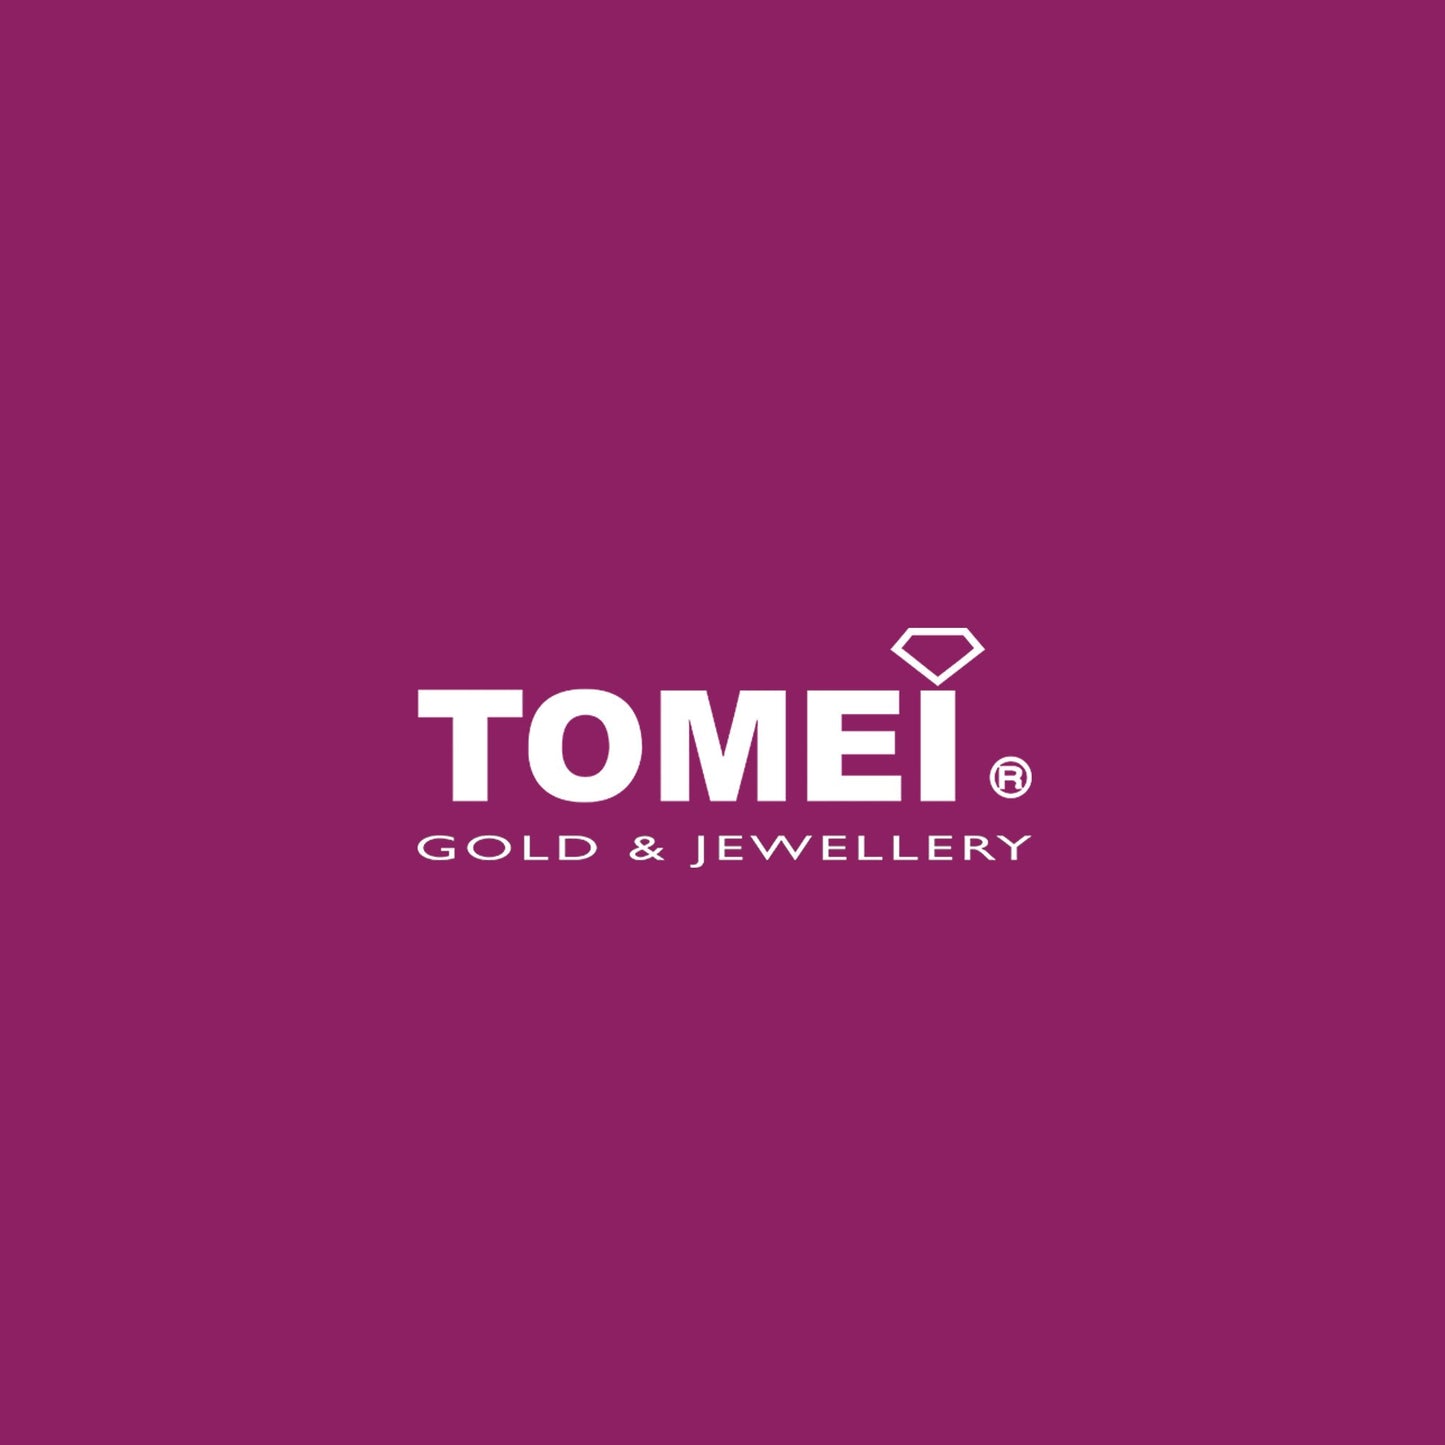 TOMEI Cylinder Link Necklace, White Gold 750